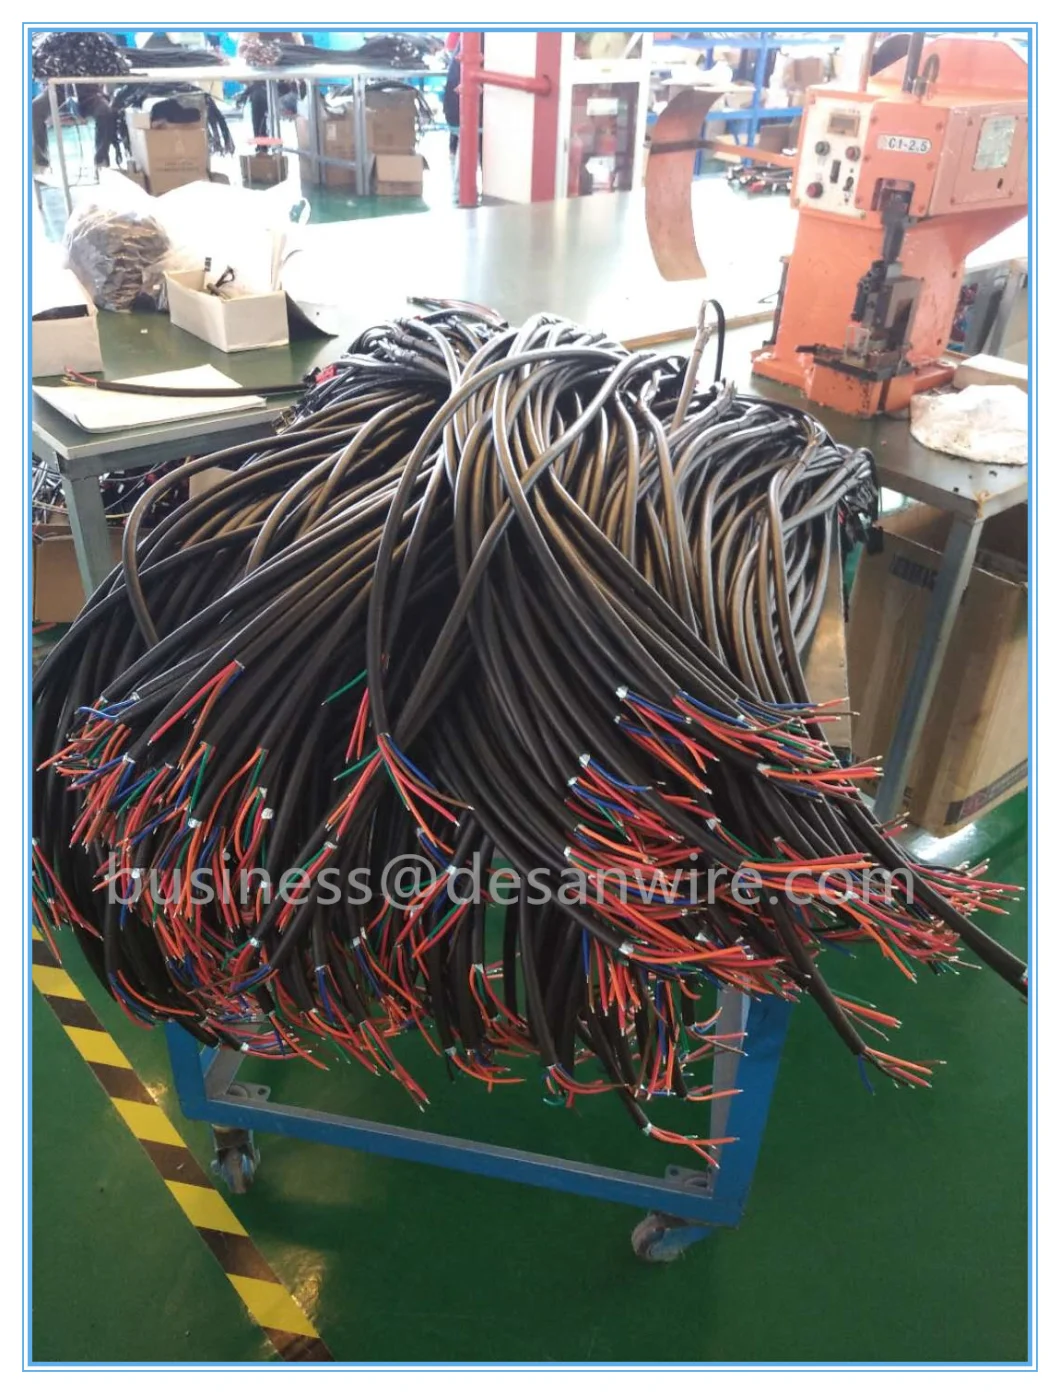 Cable for Wiring Wire Harness of Electric Automotive Car Automotion Vehicle Intelligent Charger